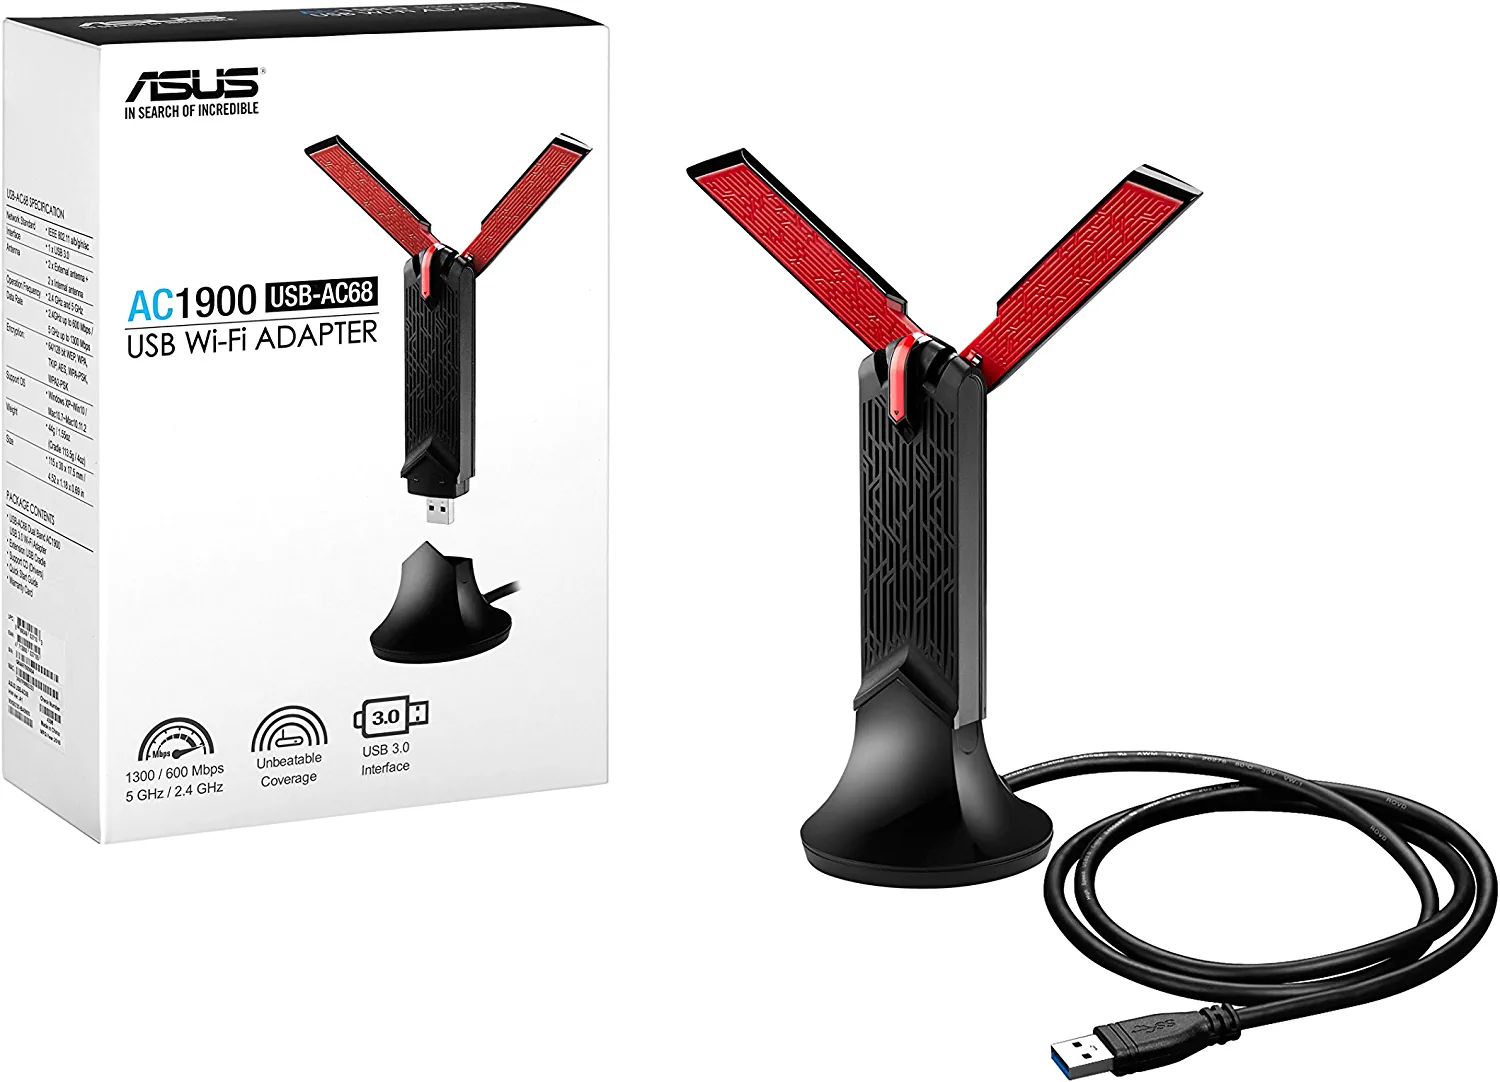 ASUS USB-AC68 AC1900 Dual-band USB 3.0 WiFi Adapter\ Cradle included